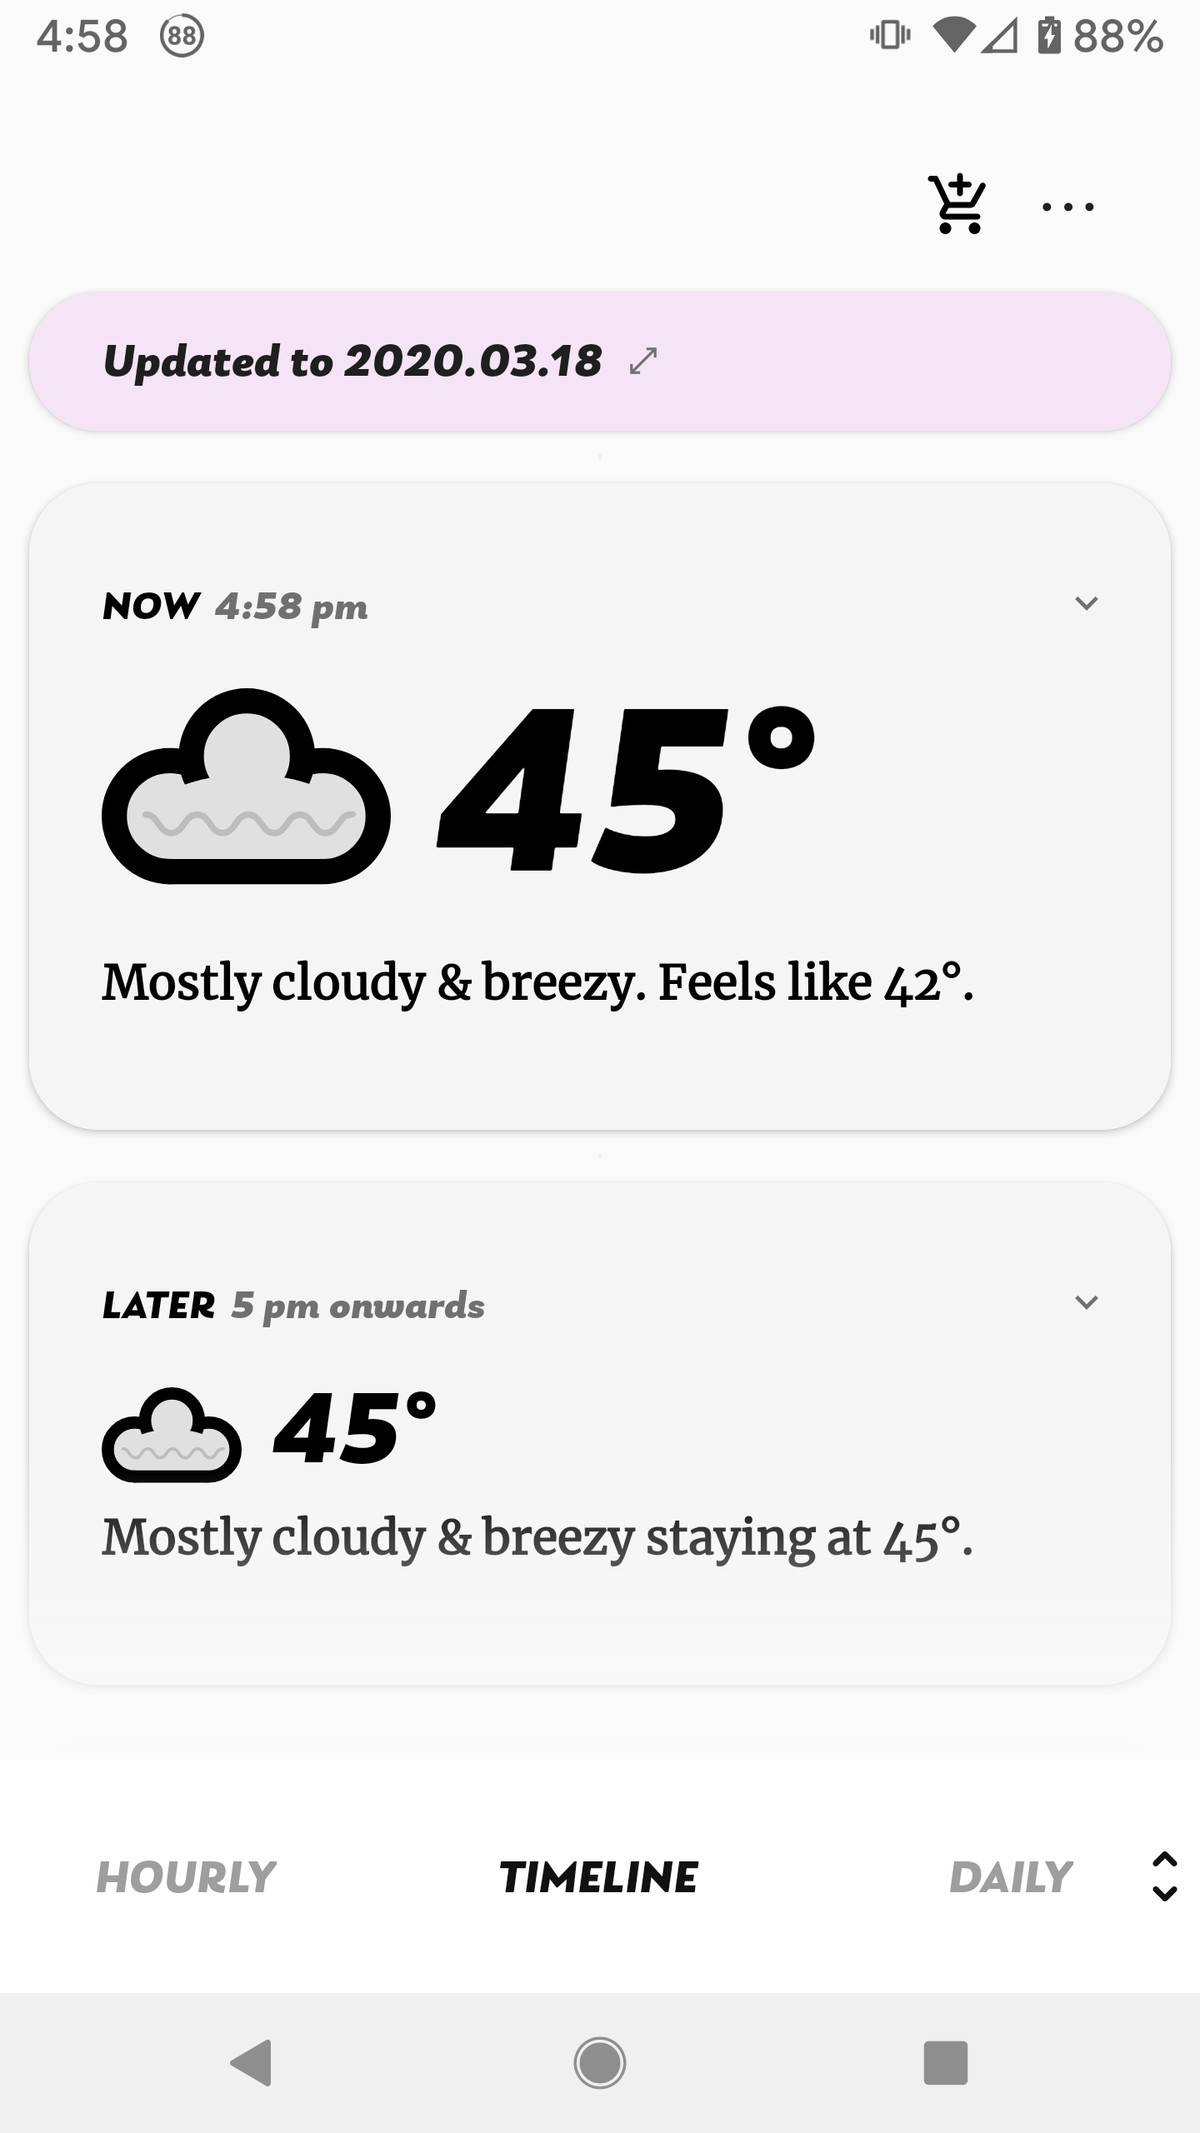 Appy Weather’s timeline lets you scroll down to see the current weather and the upcoming forecast.